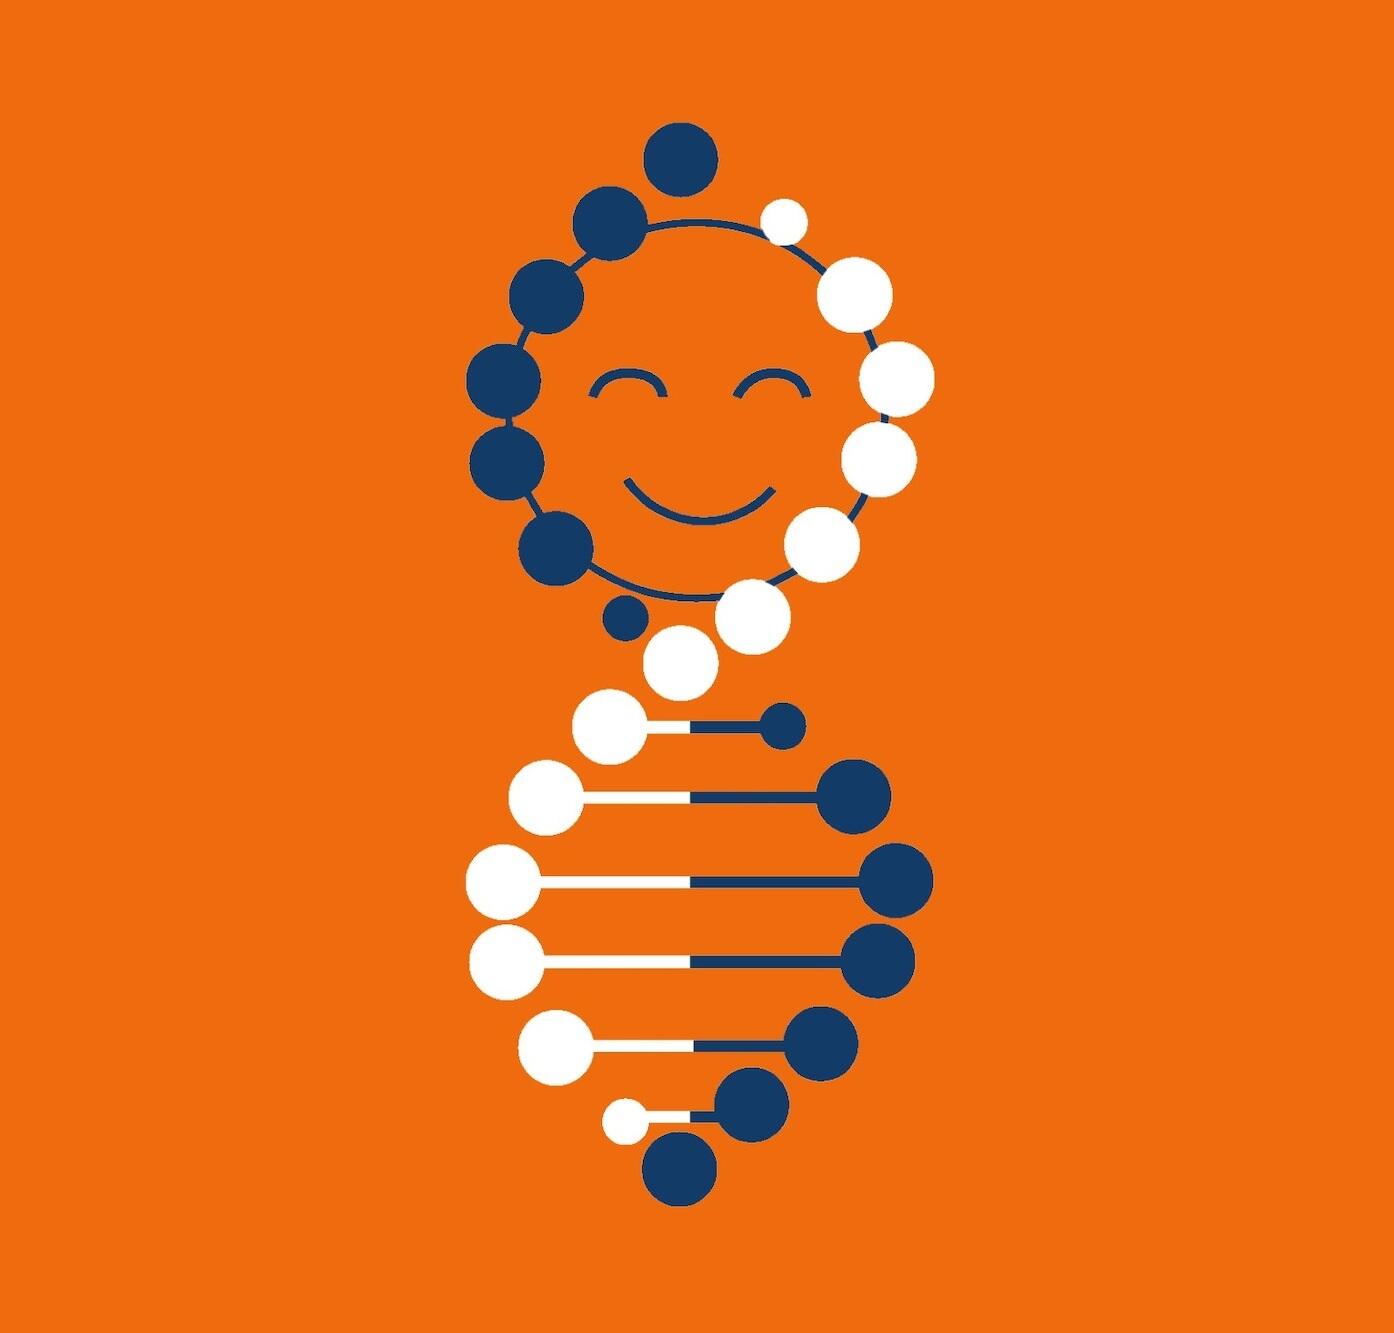 Illustration of a gene helix coil with a smiley face inside it